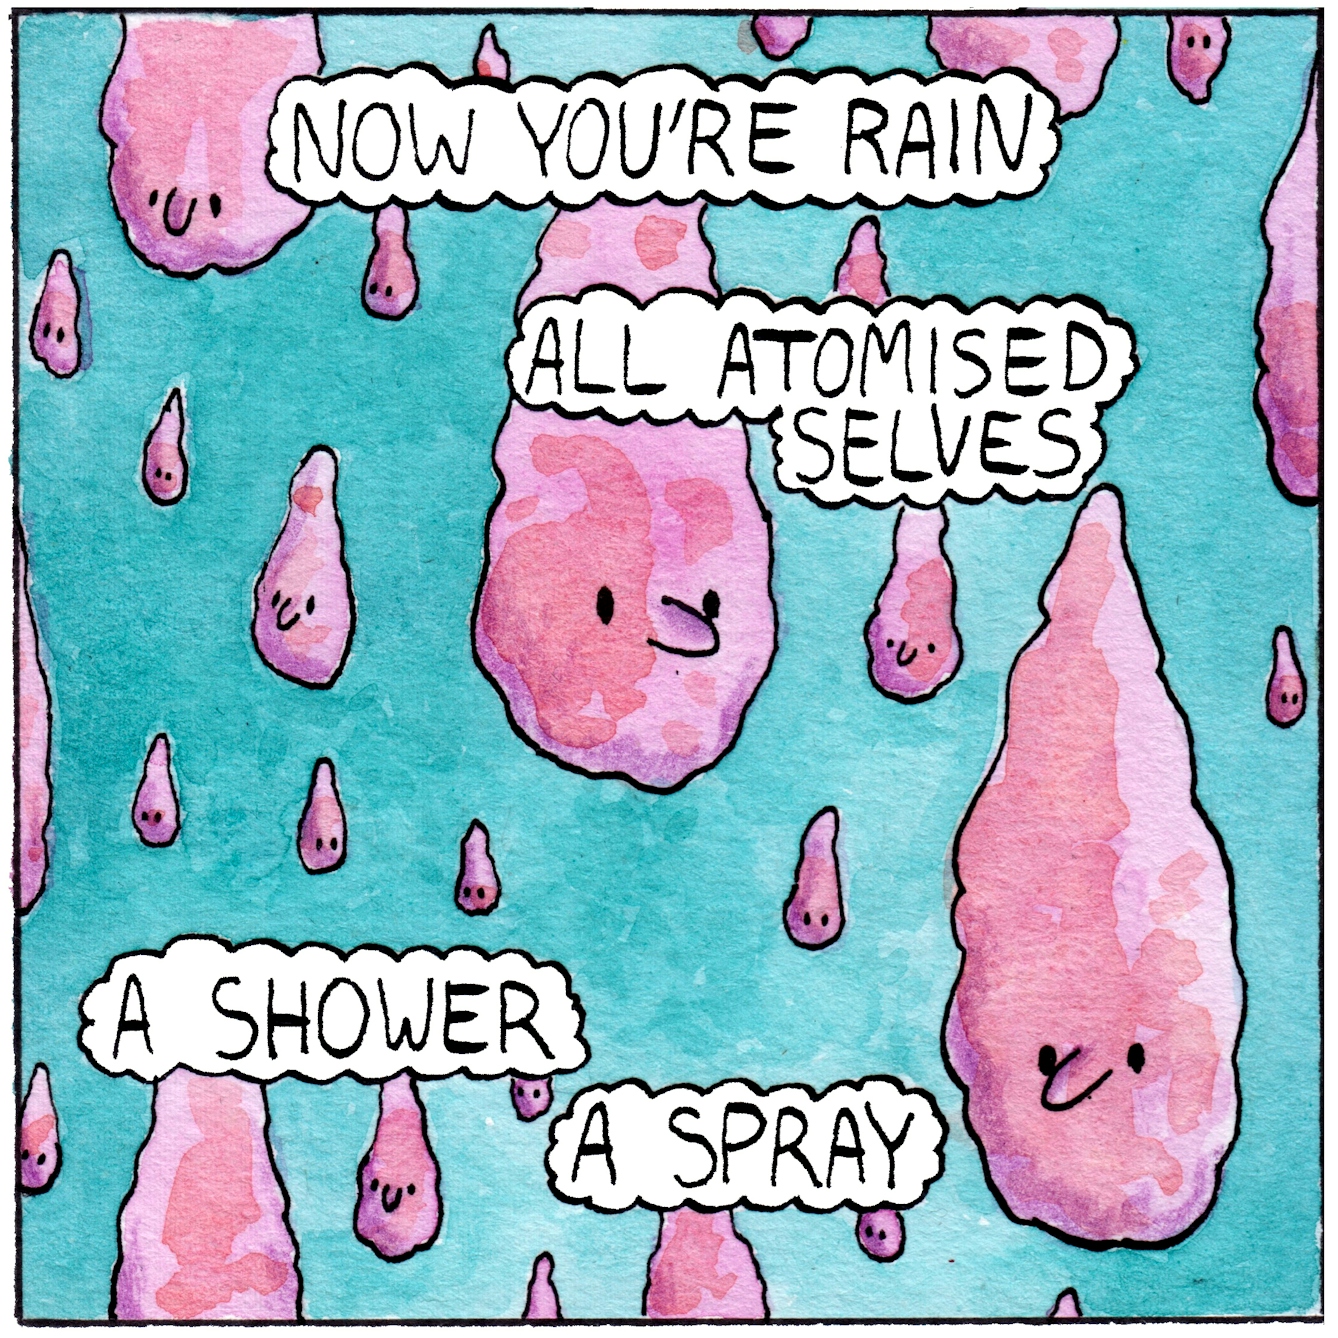 Panel 5 of the webcomic 'Unpaid break'. The whole panel is full of pink 'droplet' shapes falling downwards against a turquoise-sky background. Four text bubbles across the pannel say "Now you're rain", "All atomised selves", "A shower", "A spray".